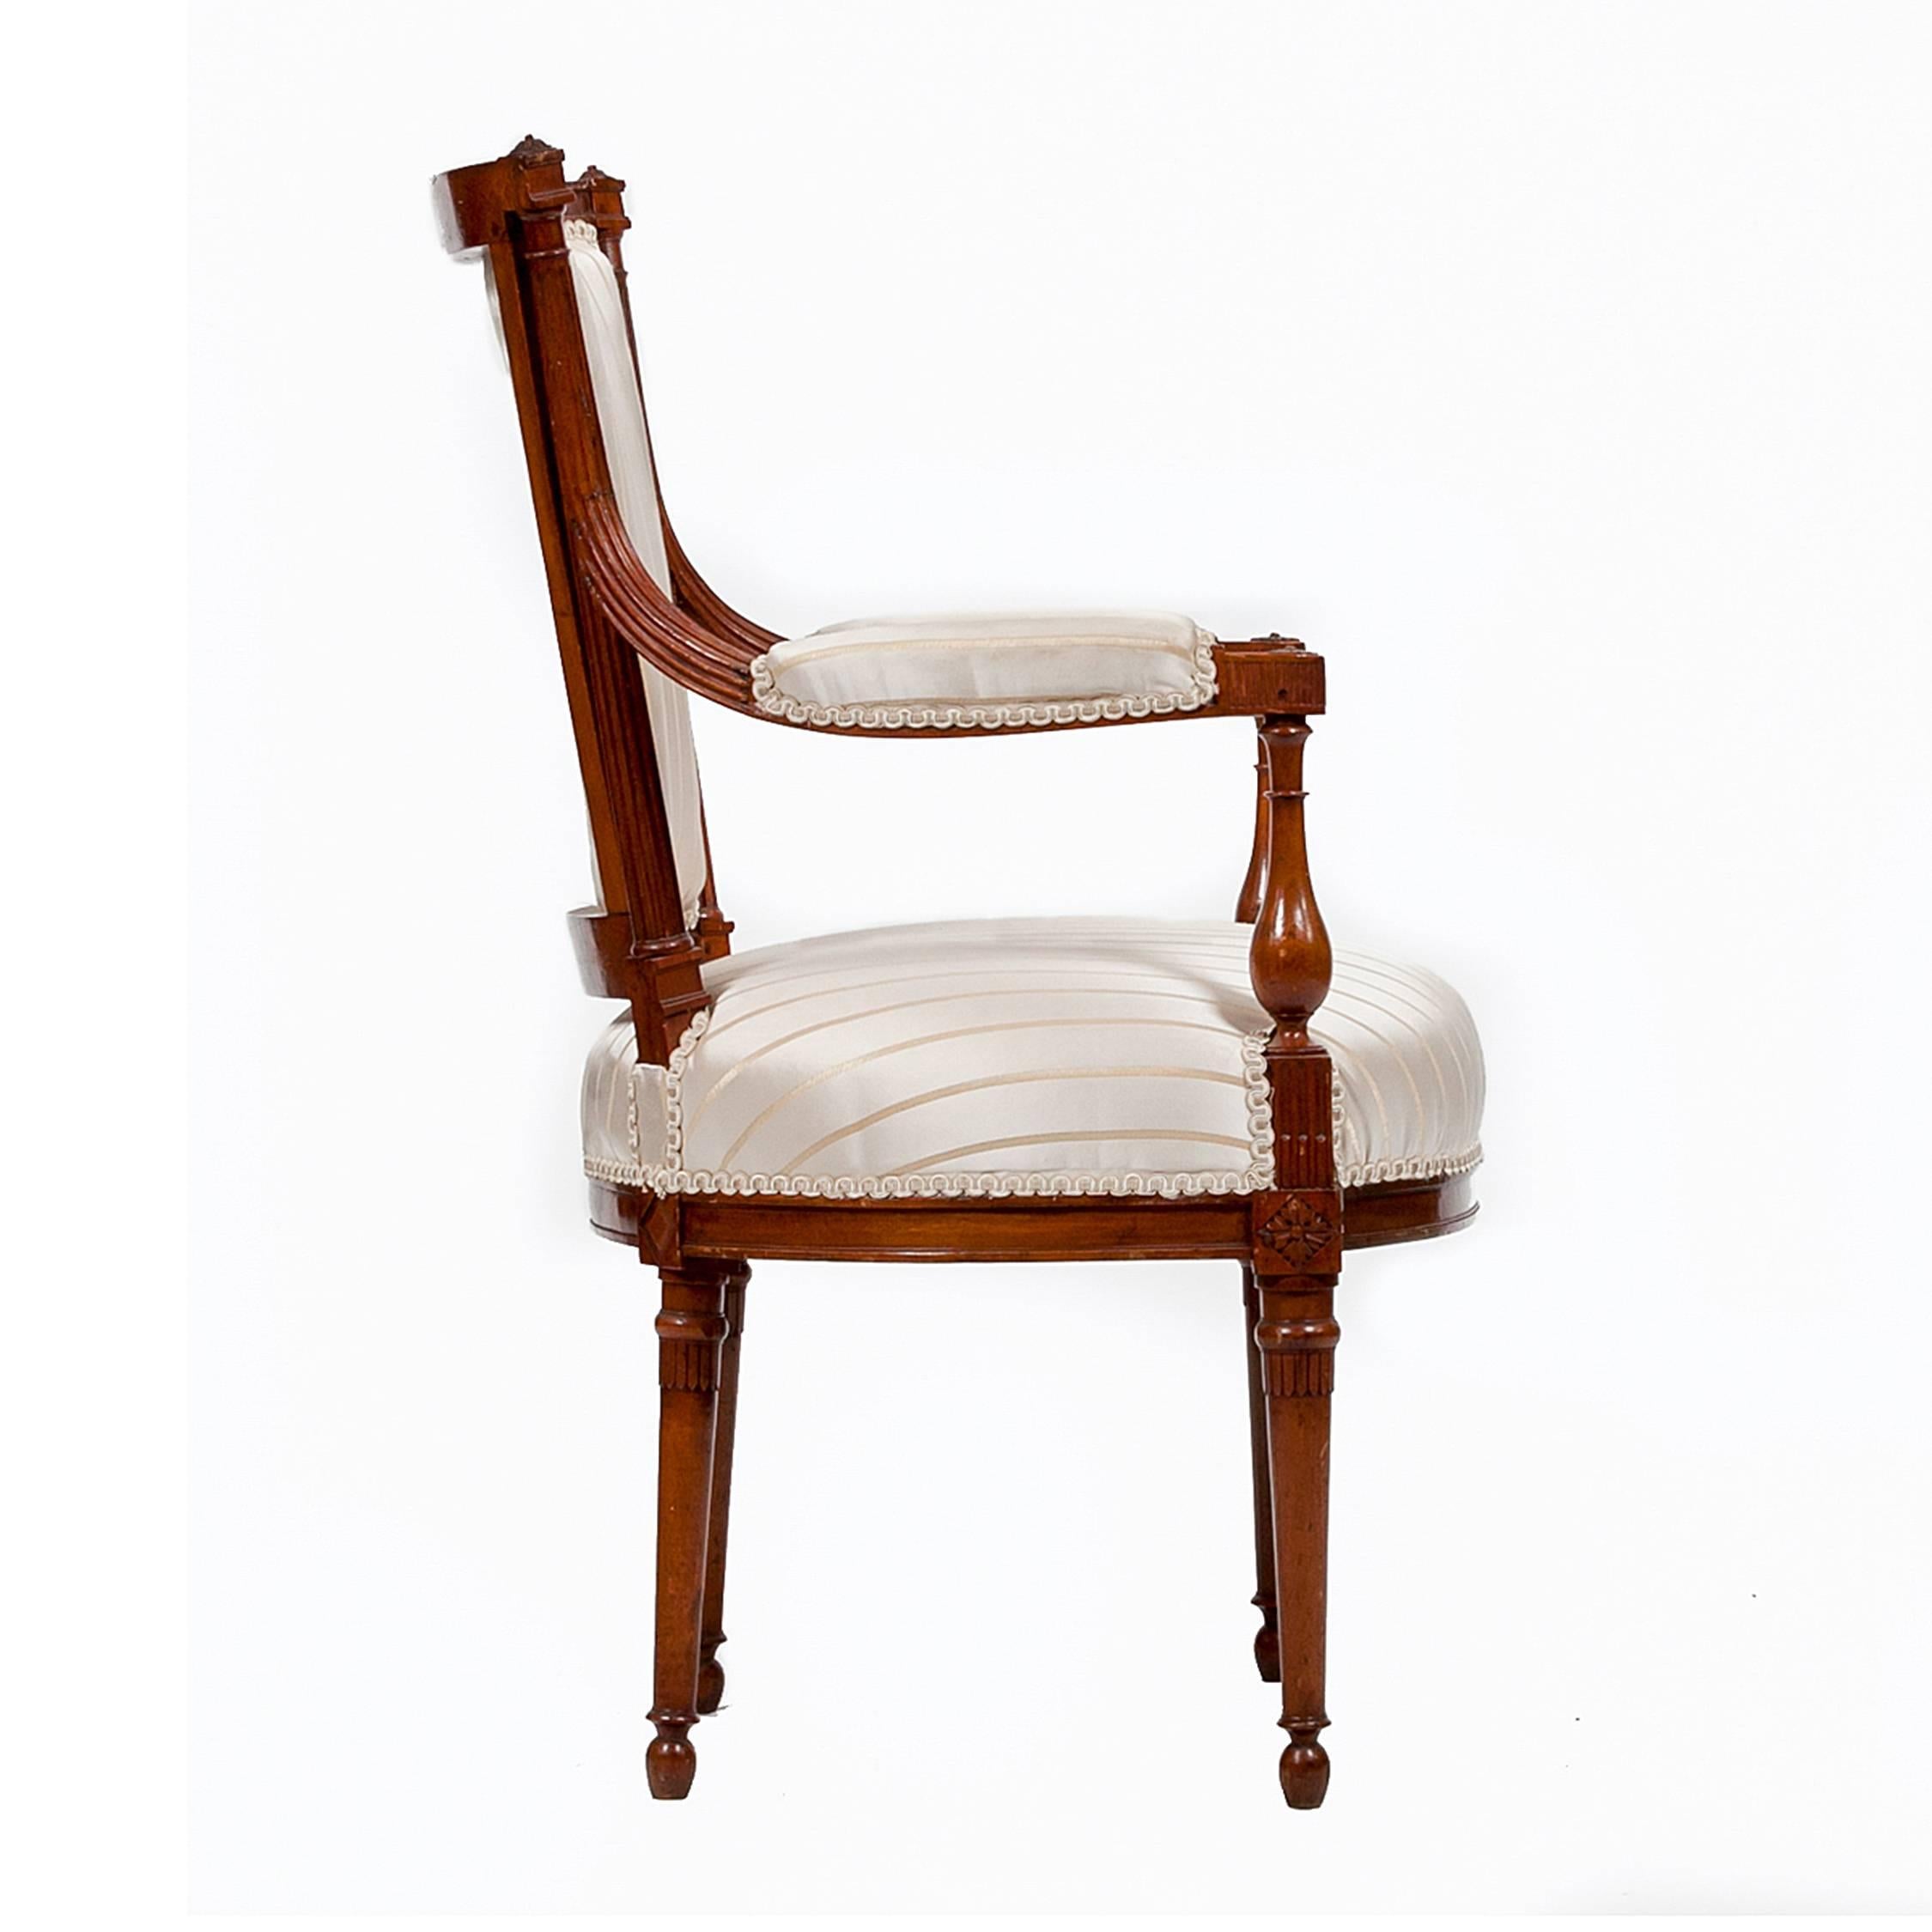 These delicately proportioned 18th-century fauteuil armchairs exemplify the French Directoire style, each with a barreled back, and rosette finials atop fluted stiles, that branch into padded armrests with baluster supports, which then extend into